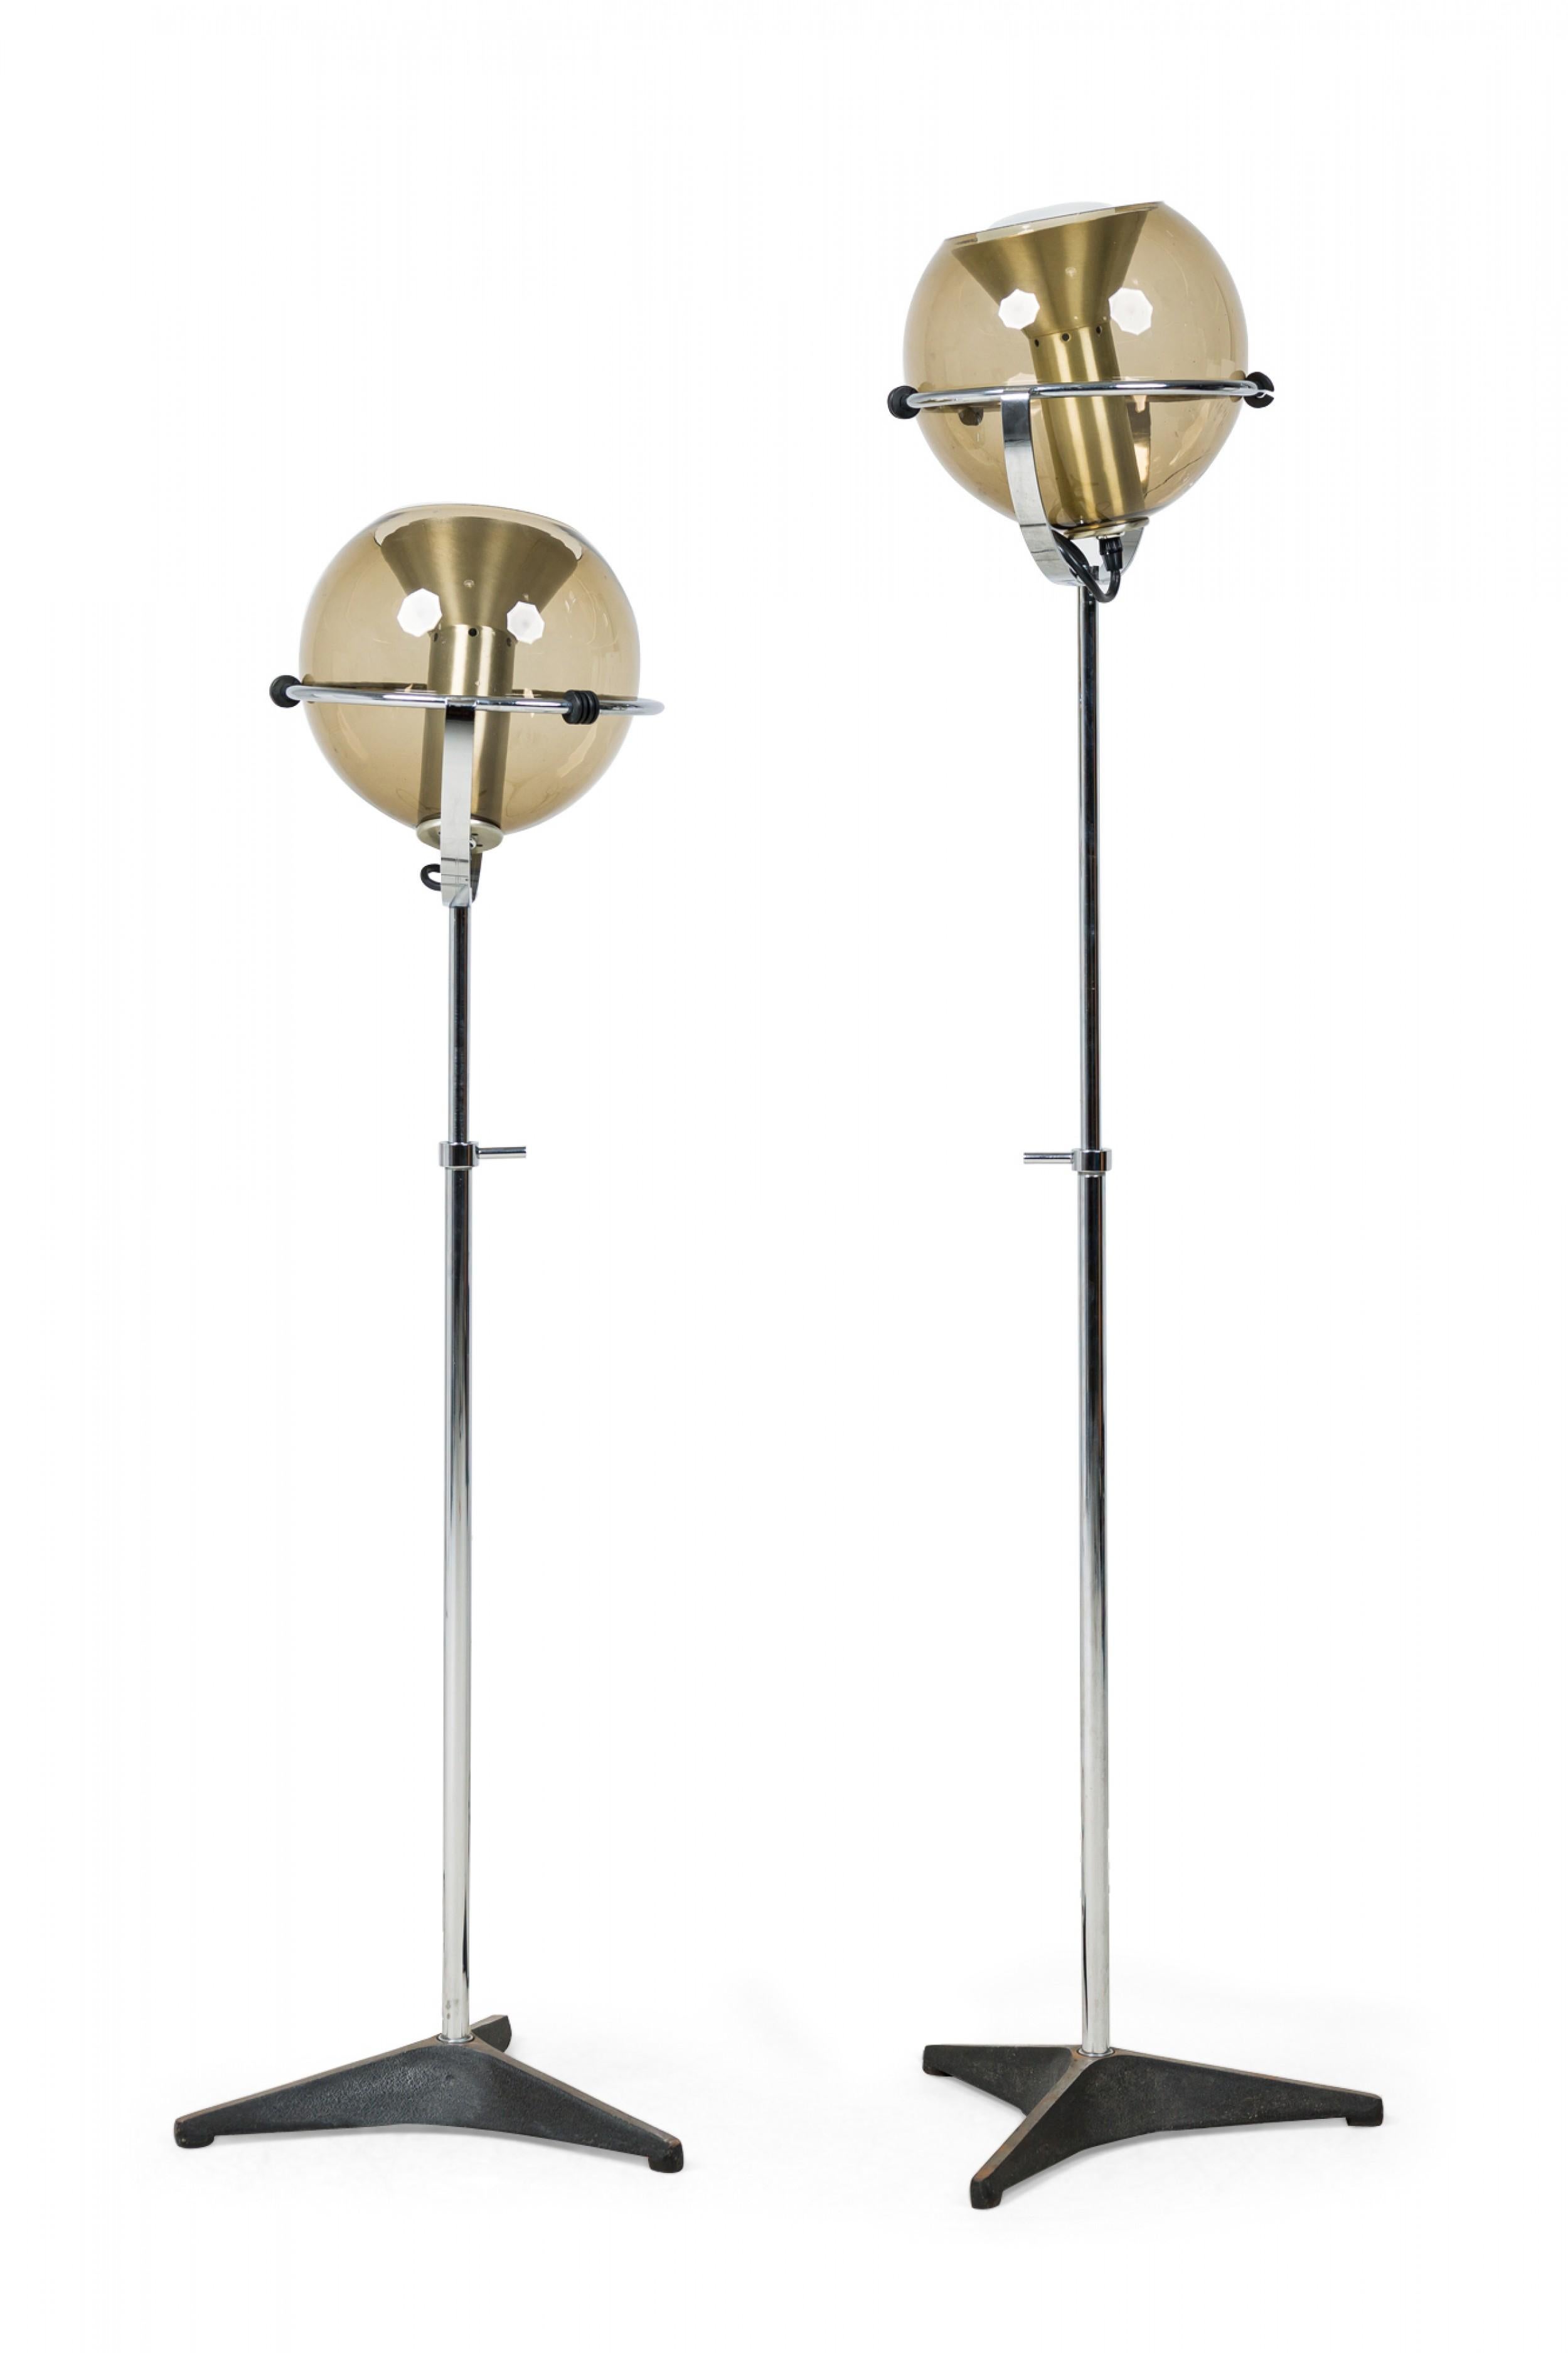 Pair of Frank Ligtelijn for RAAK Dutch Modern Floor Lamps with Adjustable Globes In Good Condition For Sale In New York, NY